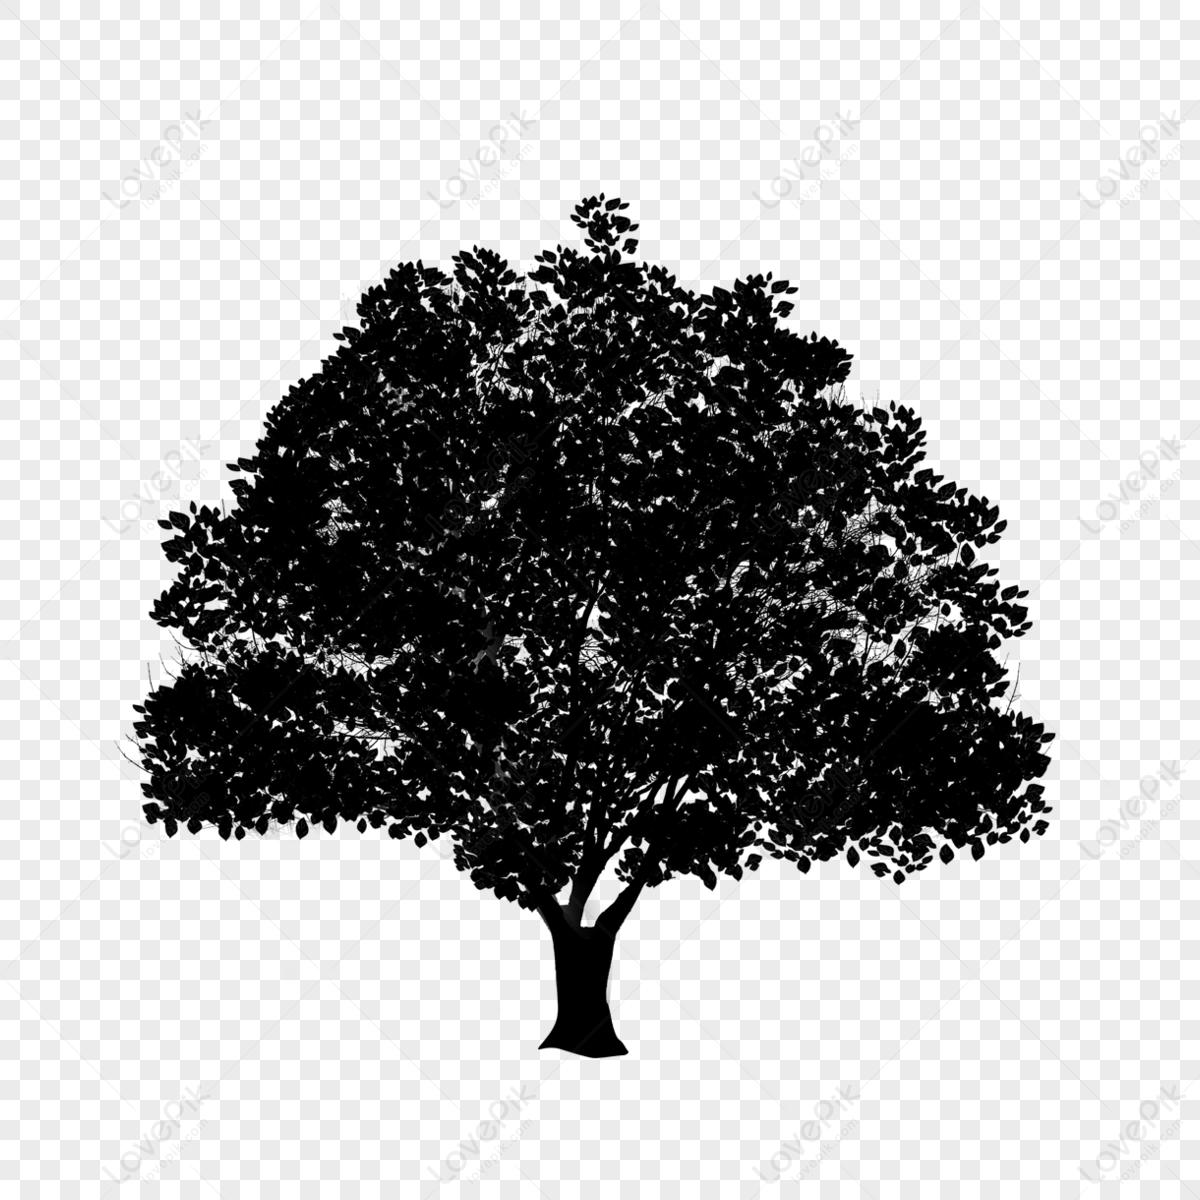 Leafy black and white trees silhouettes,populus deltoides,poplar png transparent background